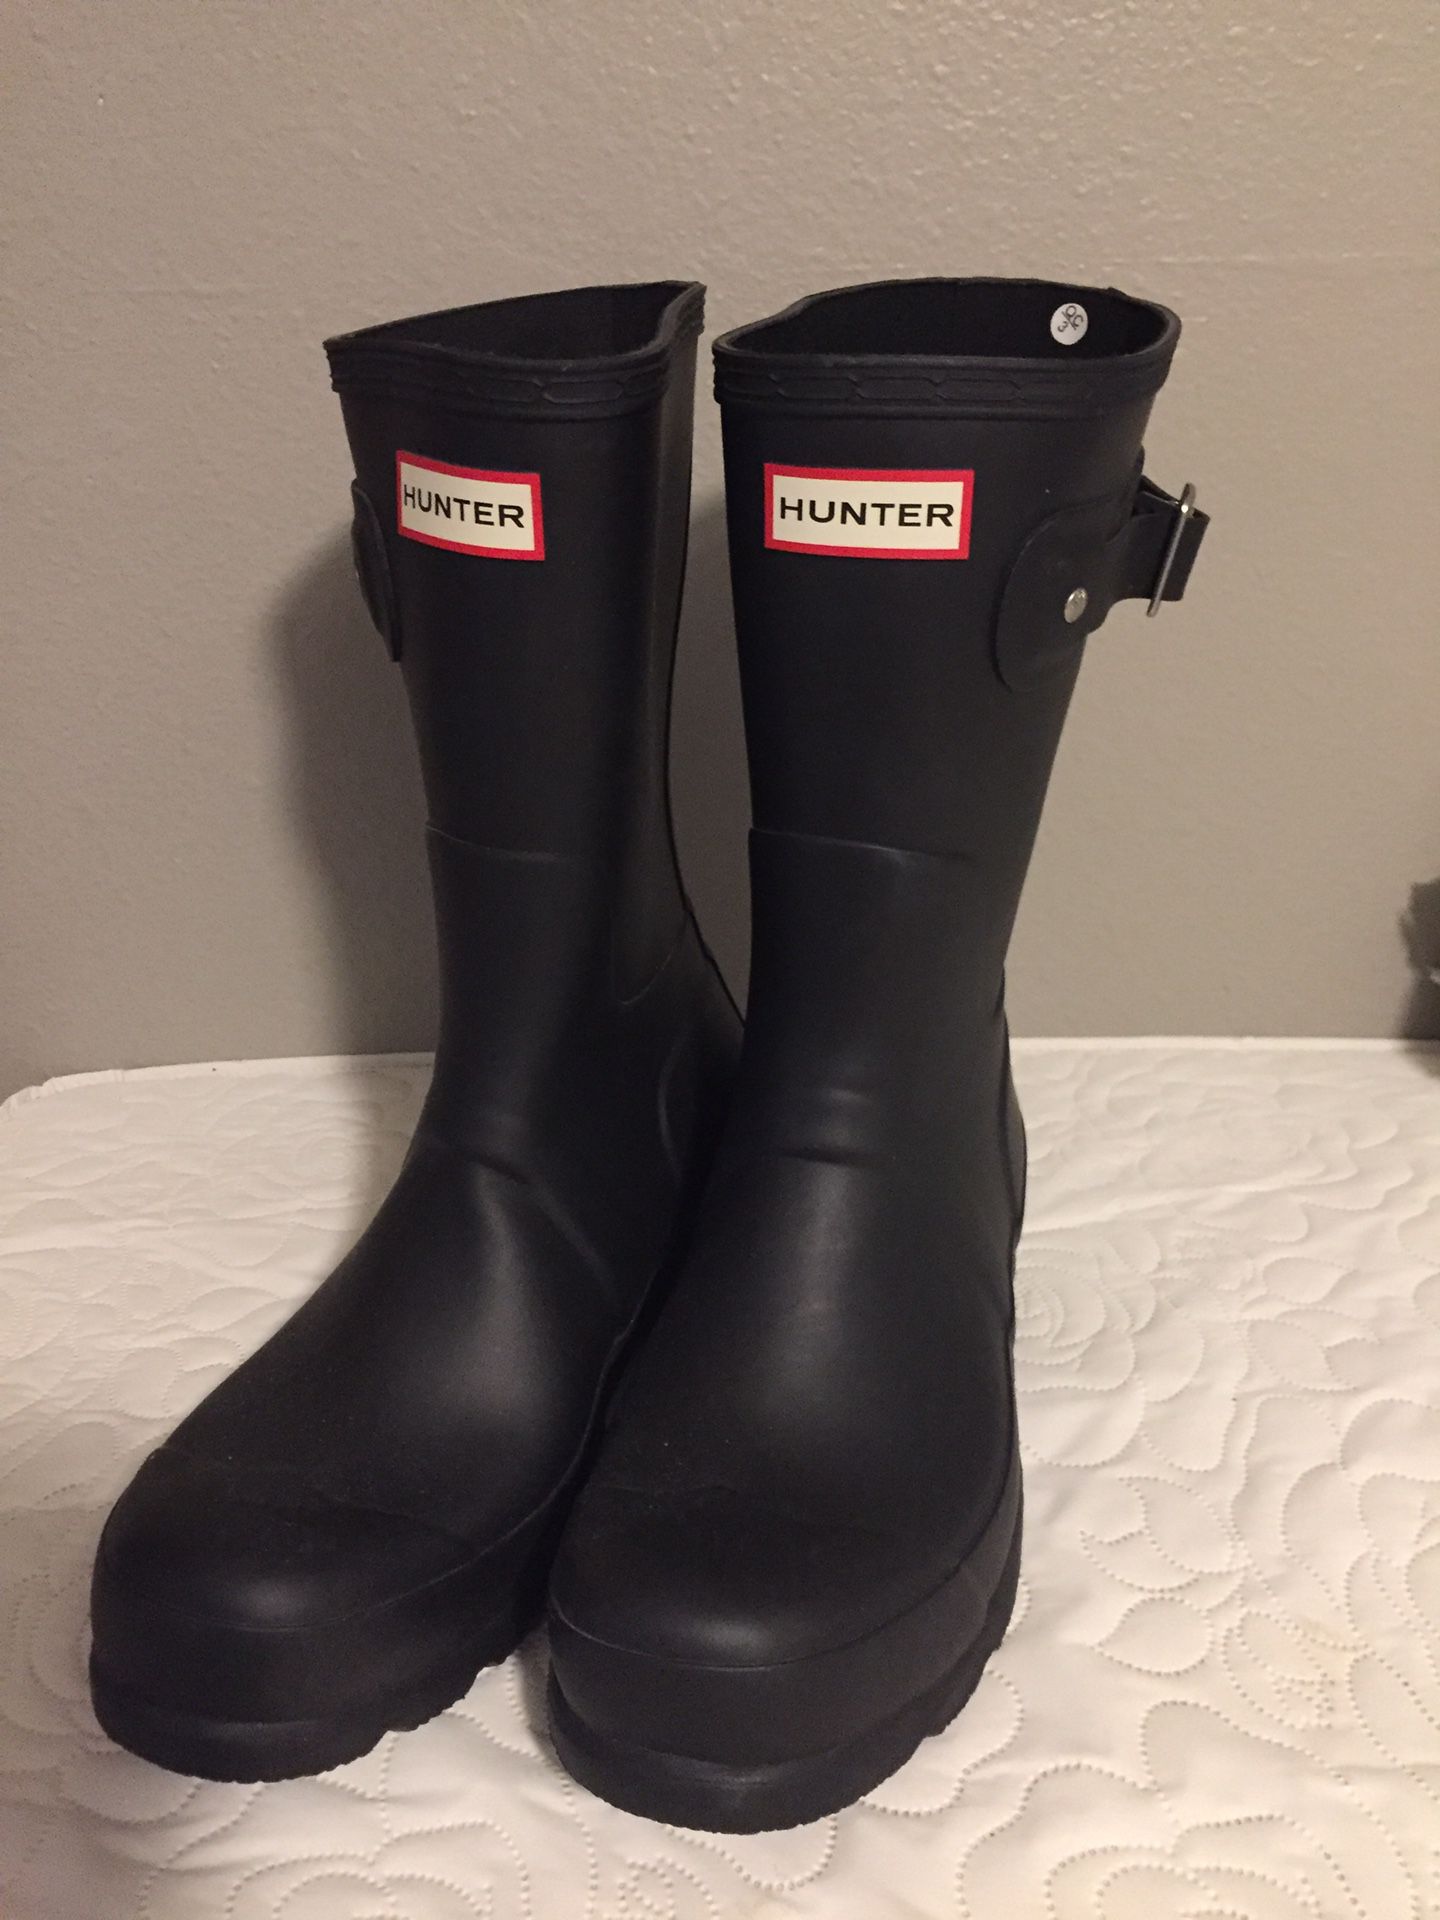 NEW Hunter Rubber Boots